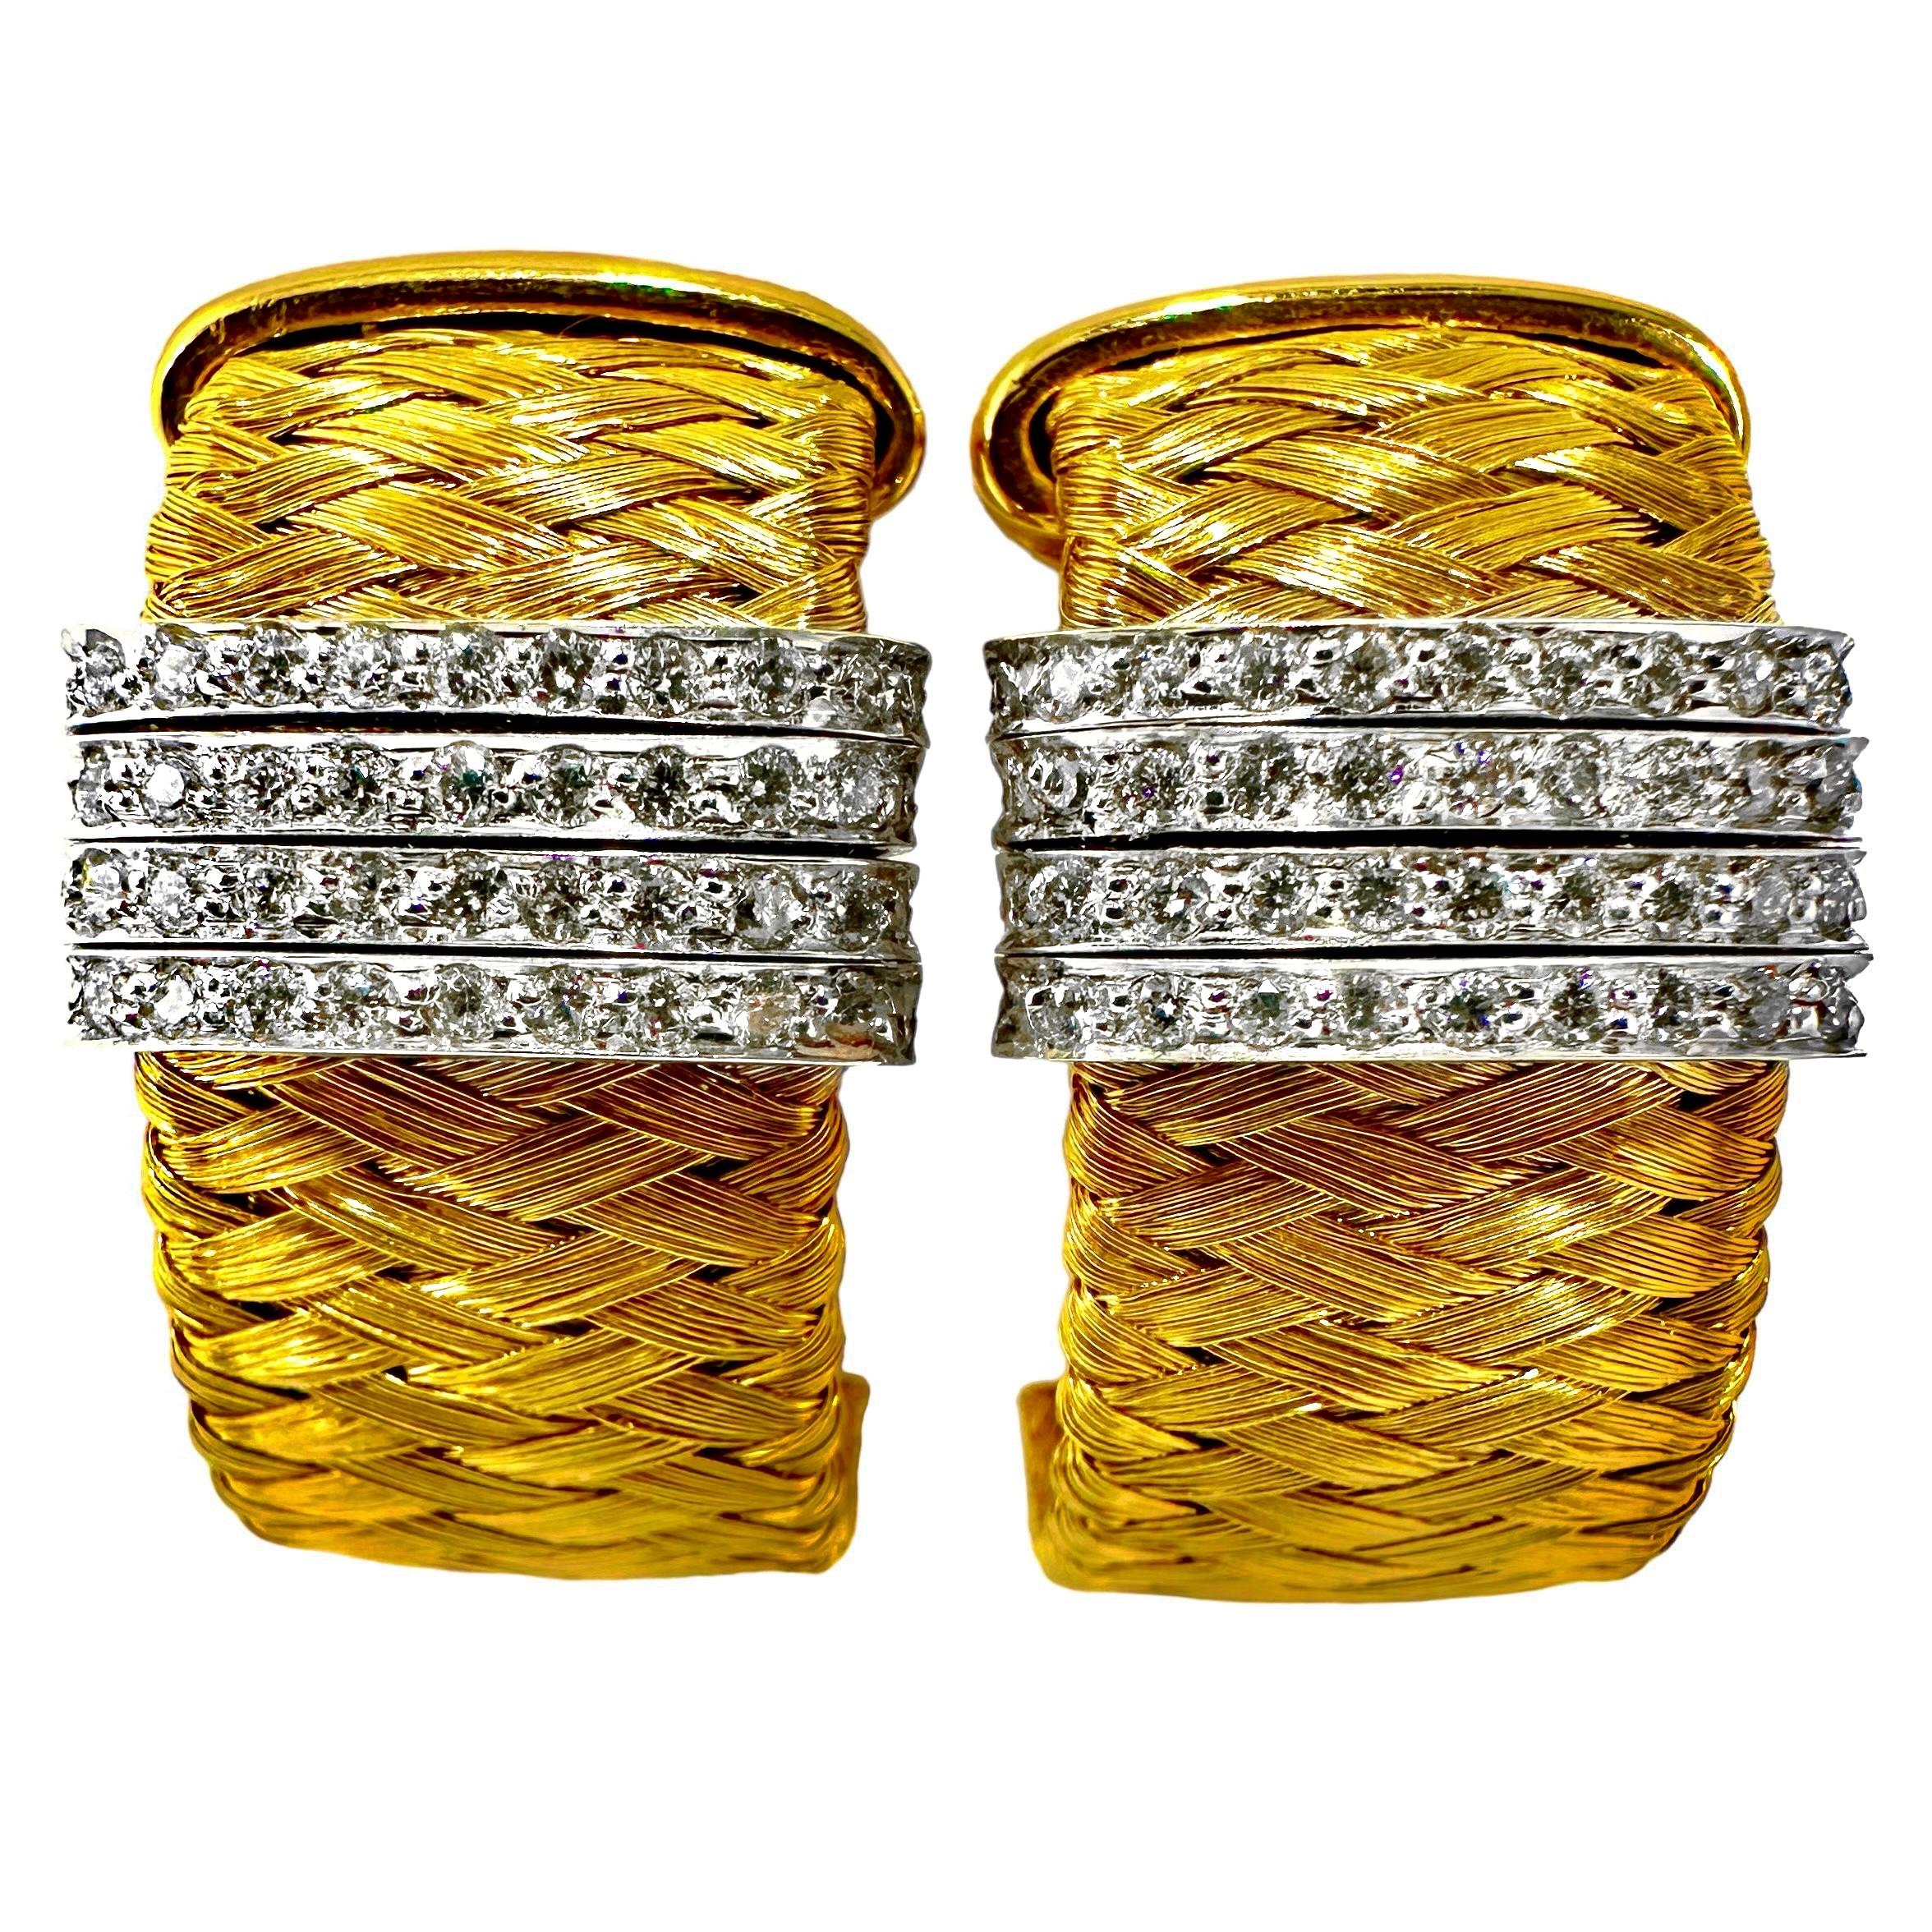 These are Italy's best and finest hand spun gold and diamond hoops. imagined and designed by Roberto Coin and fabricated by Italian master goldsmiths in Vicenza Italy.
Each part of the tightly braided surface is made up of 12 individual strands of